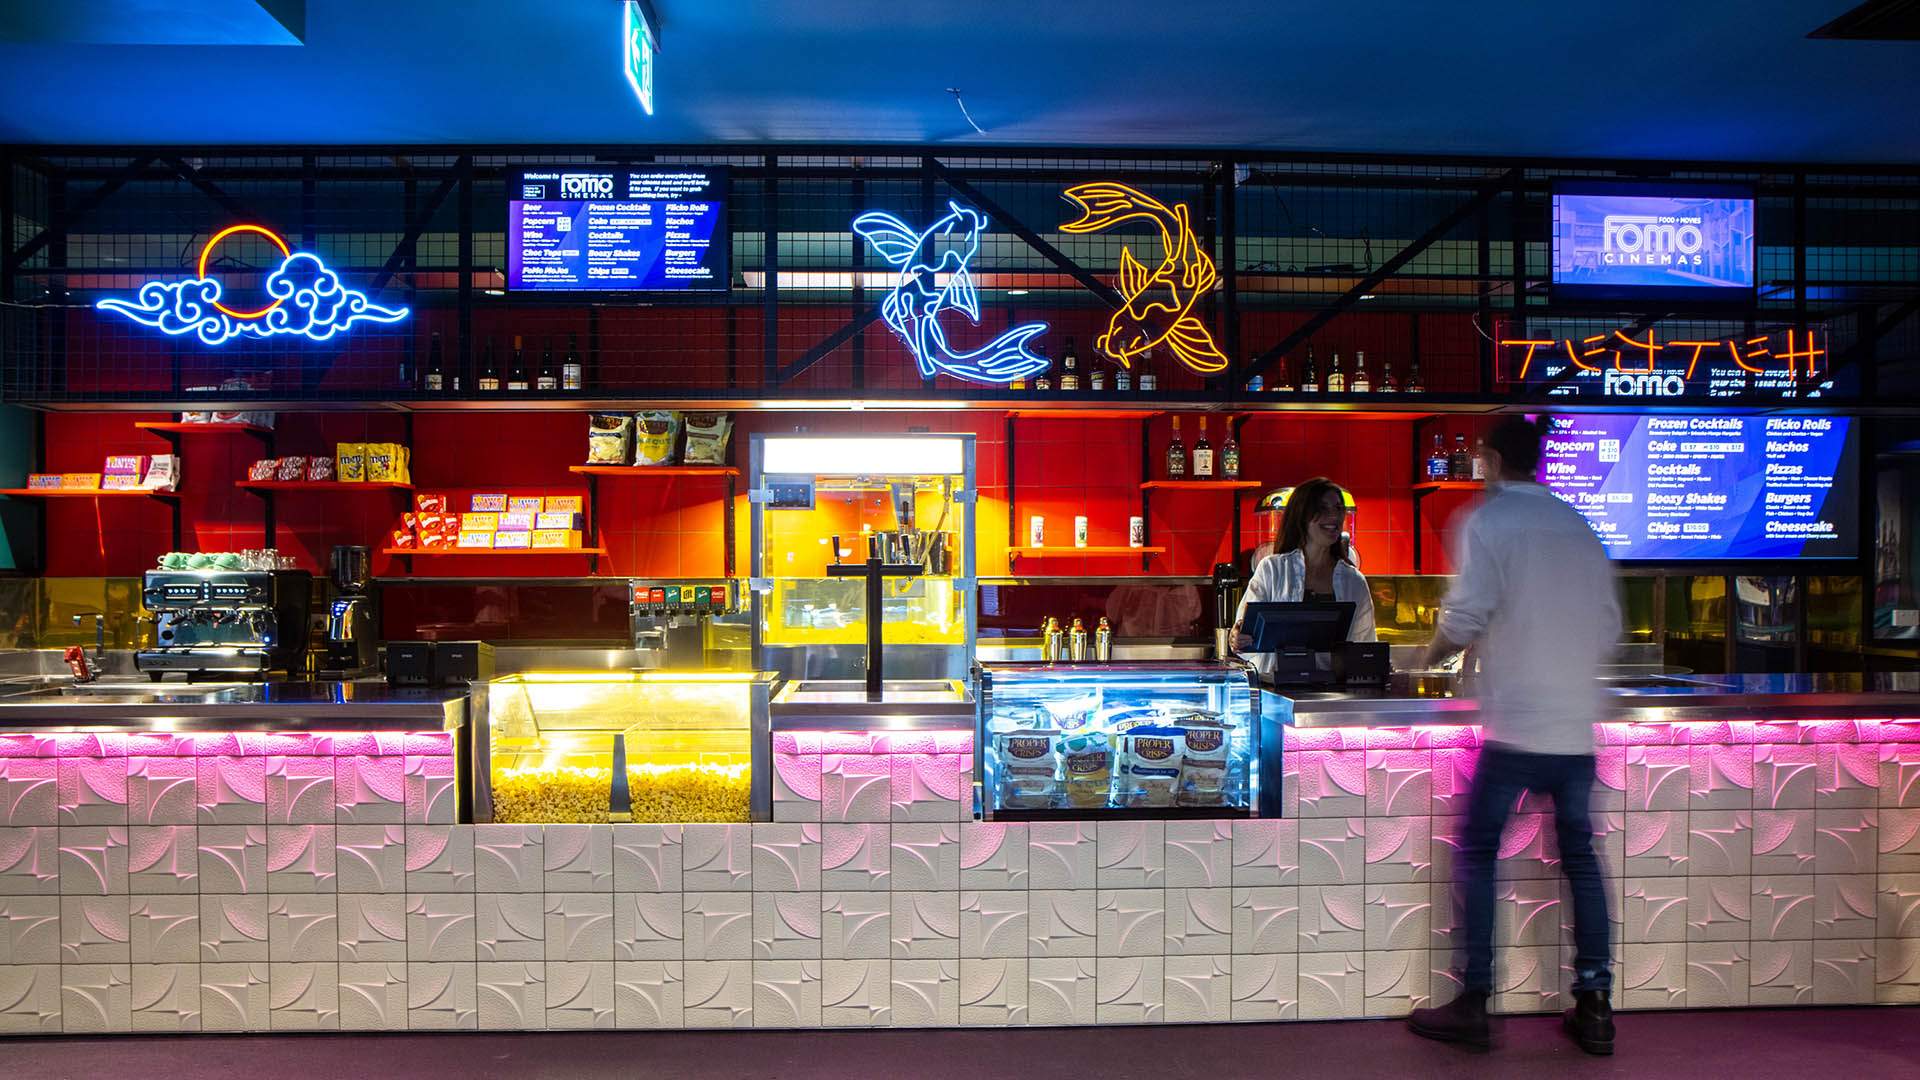 FoMo Is the Australian-First New Melbourne Cinema Combining Movies, Dining and a 'Blade Runner'-Inspired Bar